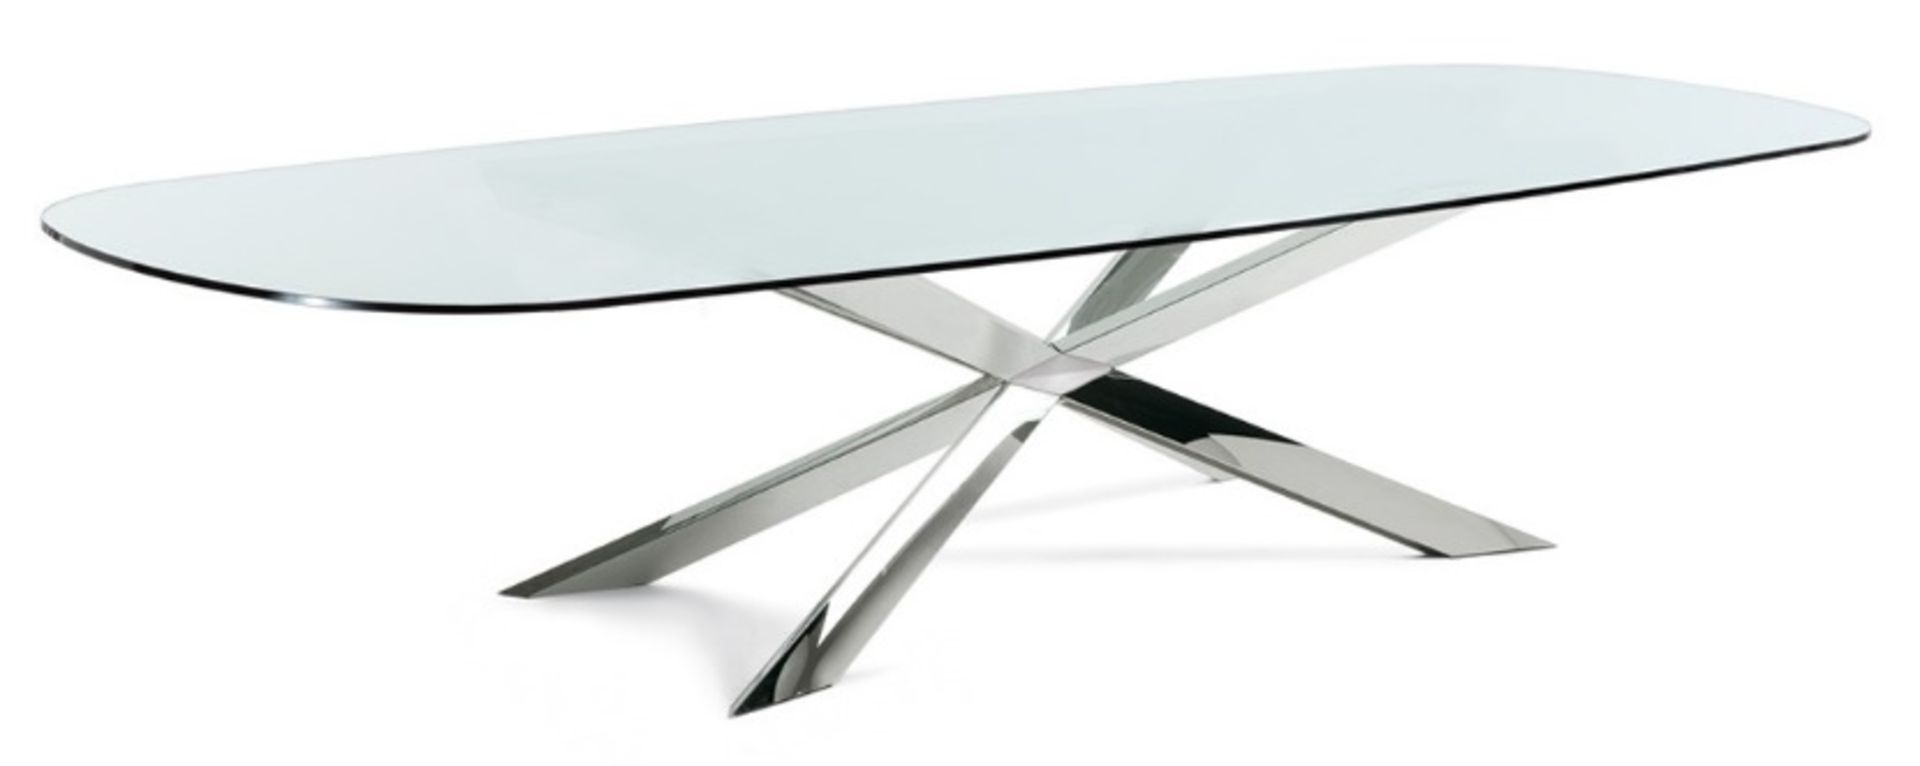 1 x CATTELAN "Spyder" Glass Topped Table - Stunning Piece In Great Condition - Dimensions: